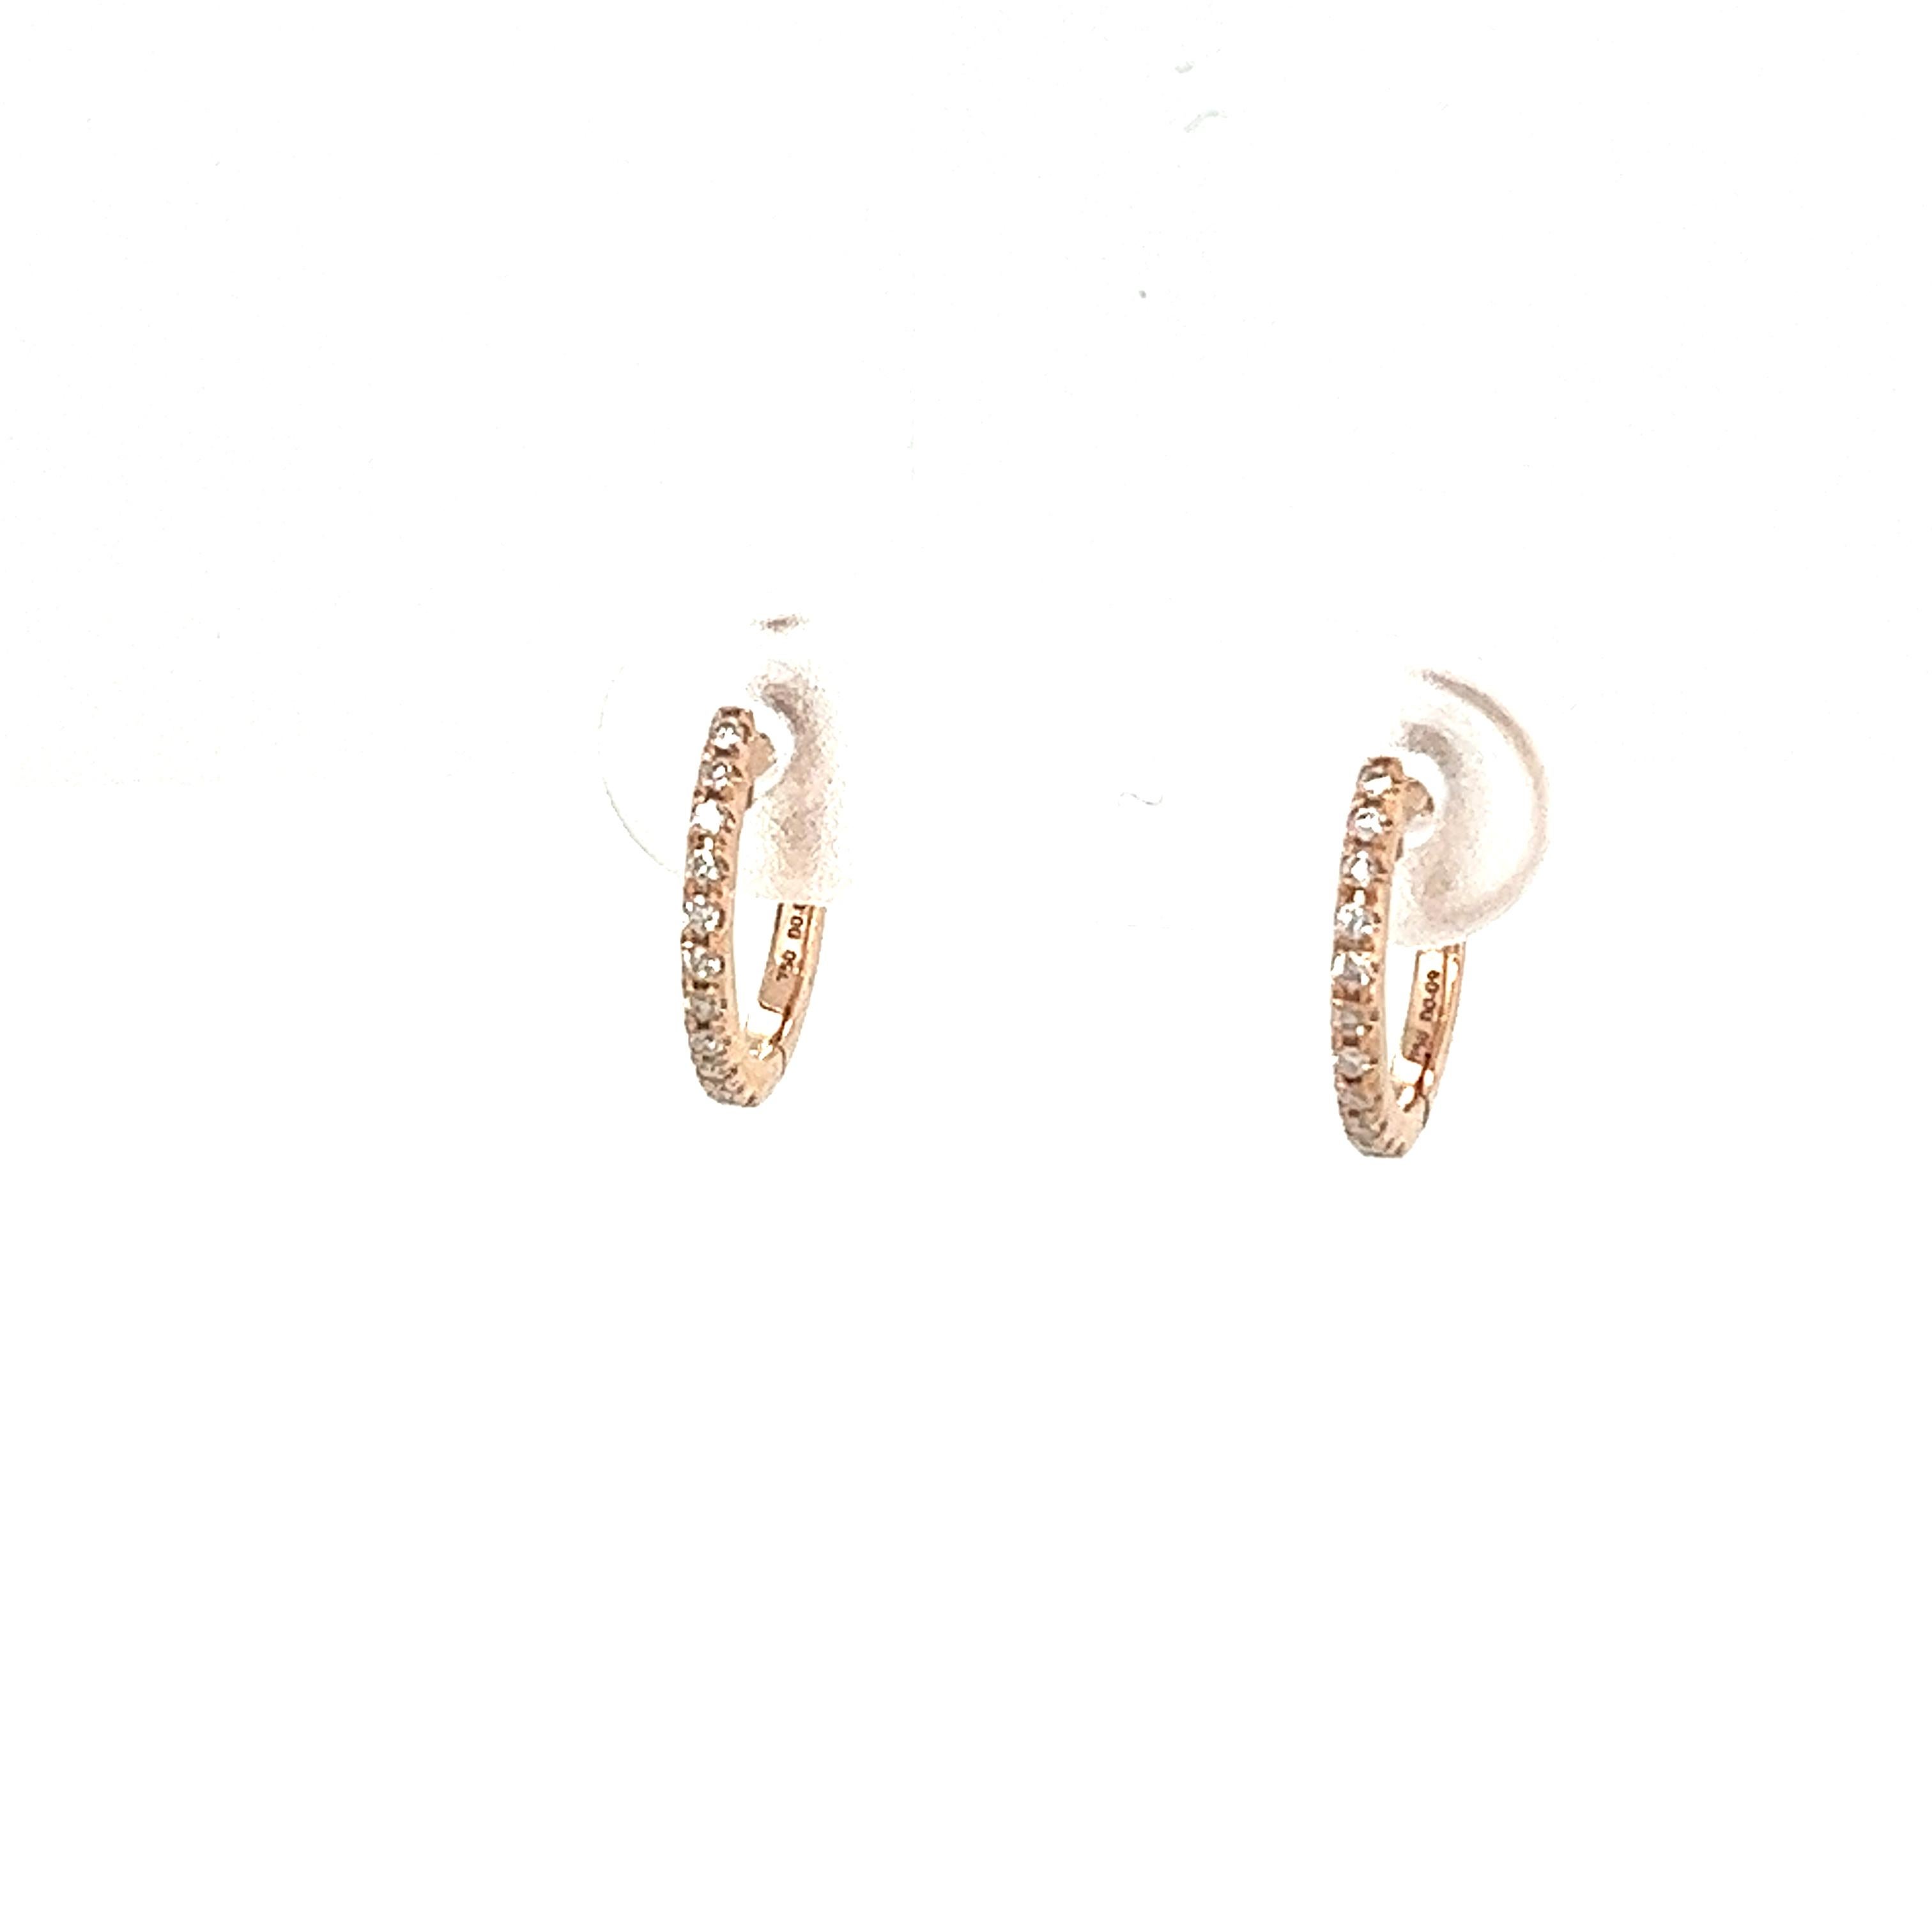 18ct Rose Gold Diamond Hoop Earrings, Set With 0.09ct Of Round Diamonds, 11mm In New Condition For Sale In London, GB